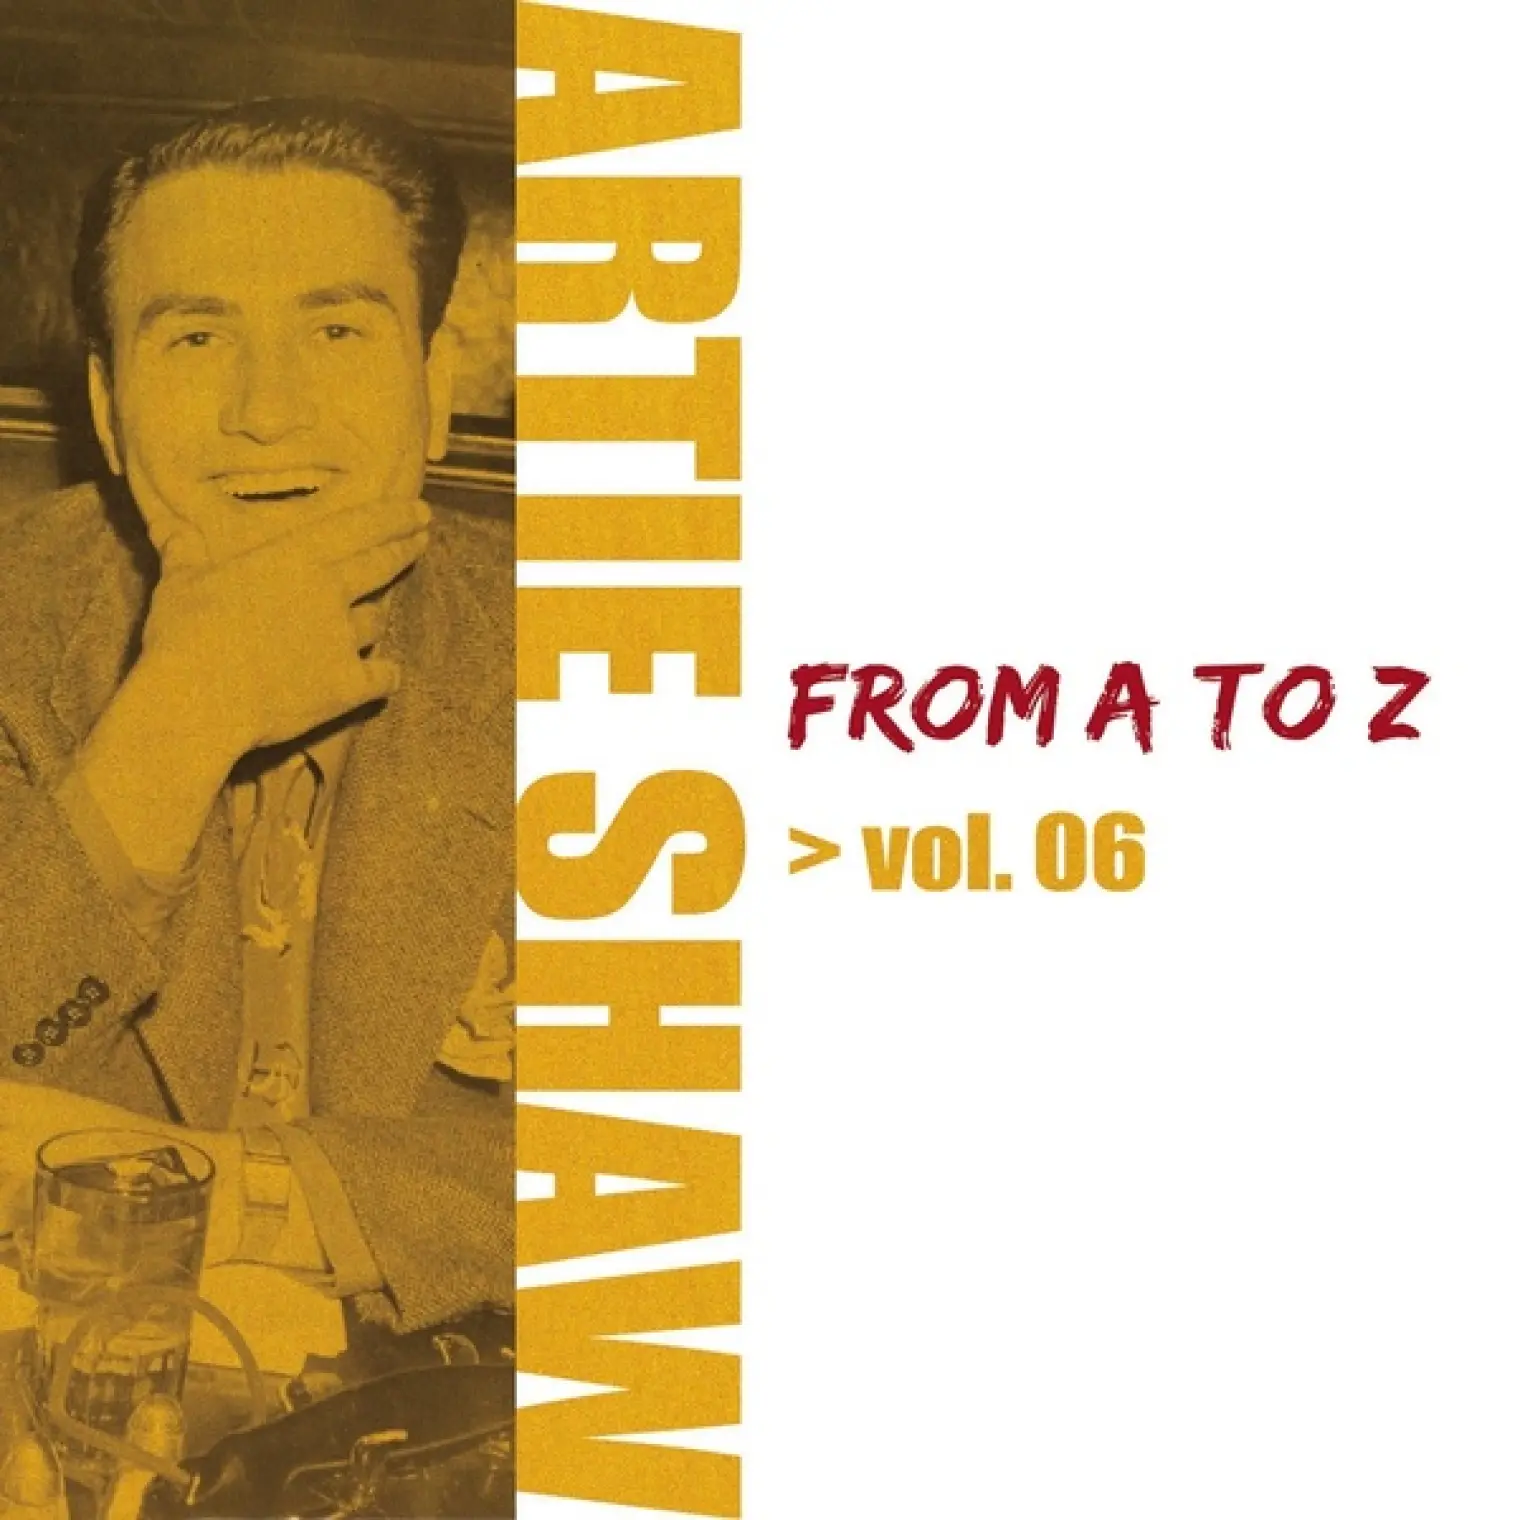 Artie Shaw From A To Z Vol.6 -  Artie Shaw 